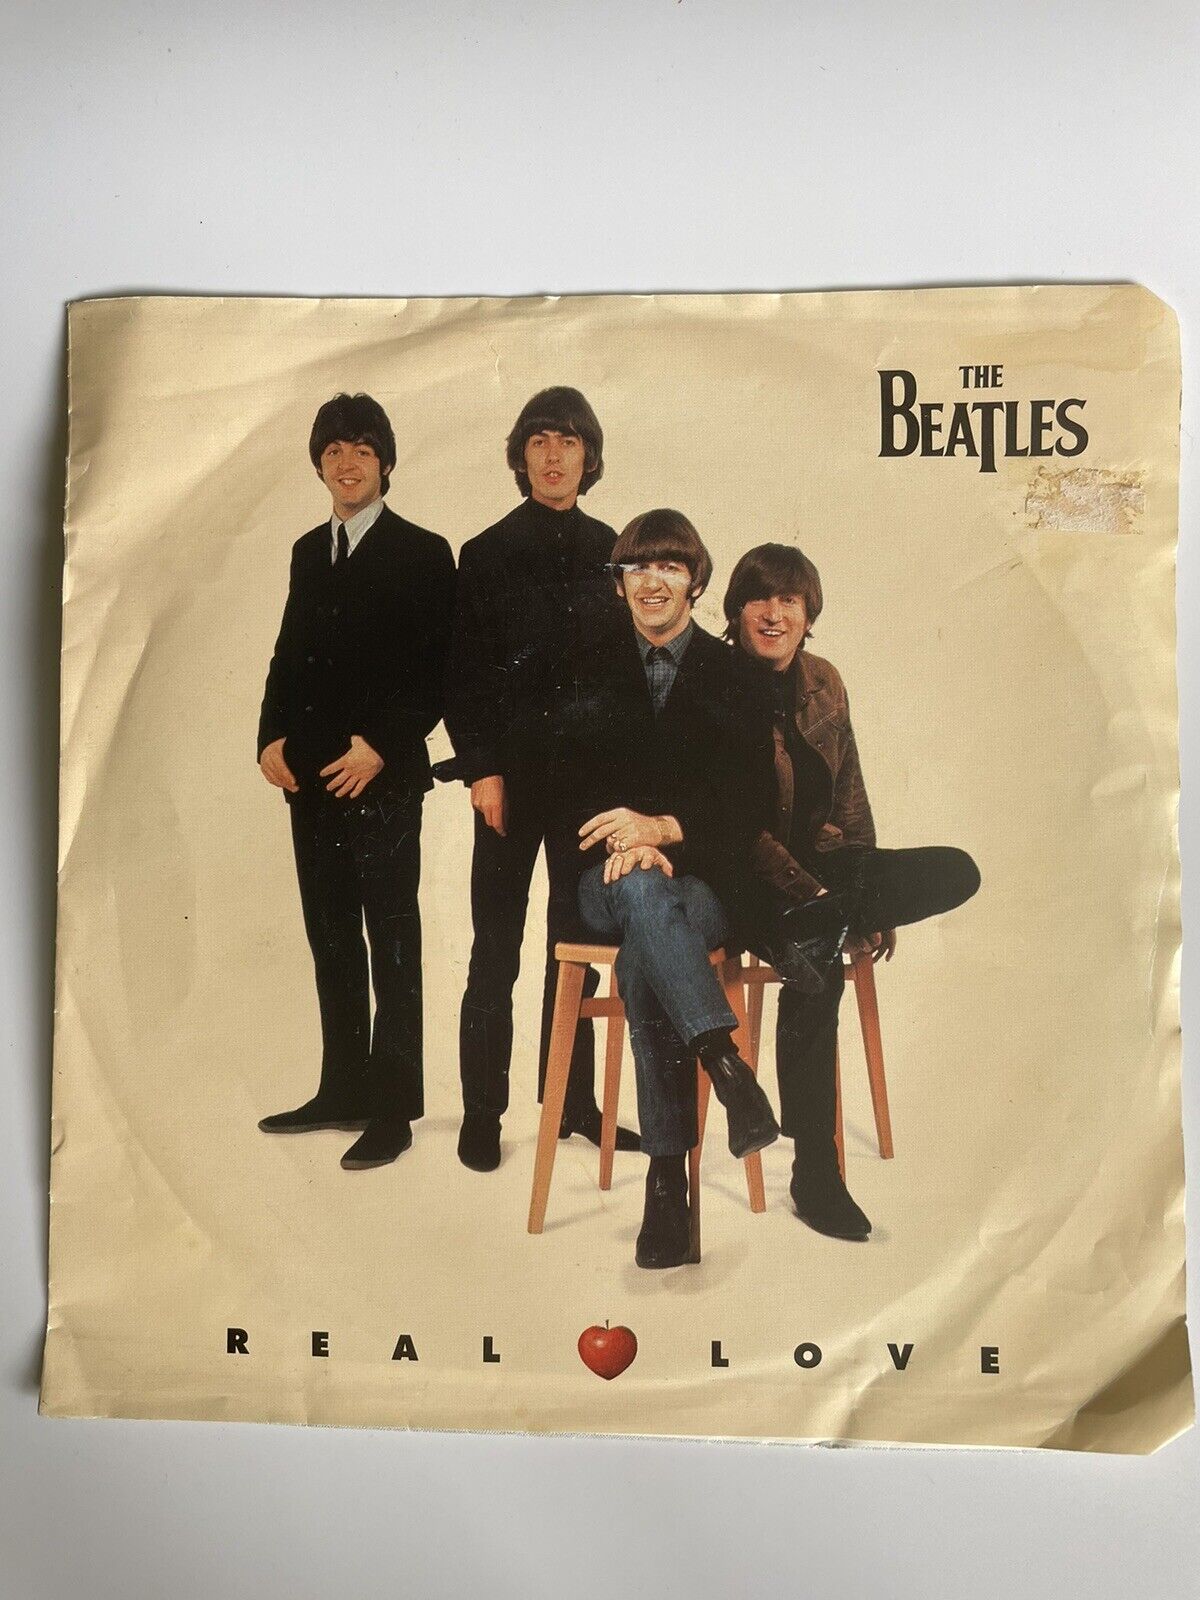 The Beatles Real Love / Baby's In Black p/s [John Lennon] 45 RPM 1996 Capitol EX